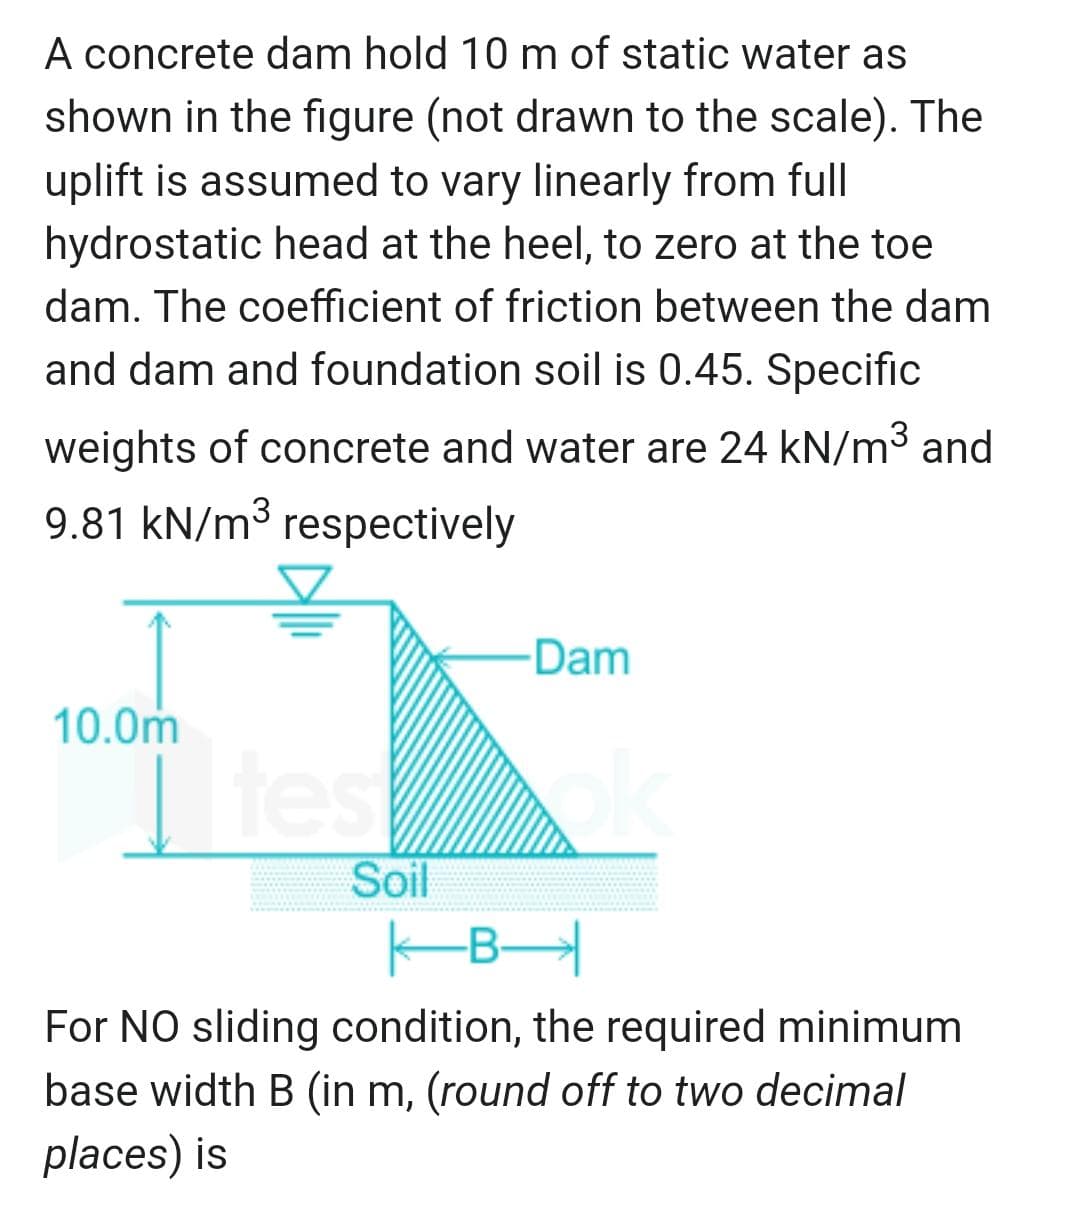 A concrete dam hold 10 m of static water as
shown in the figure (not drawn to the scale). The
uplift is assumed to vary linearly from full
hydrostatic head at the heel, to zero at the toe
dam. The coefficient of friction between the dam
and dam and foundation soil is 0.45. Specific
weights of concrete and water are 24 kN/m³ and
9.81 kN/m³ respectively
10.0m
tes
Soil
Dam
B
For NO sliding condition, the required minimum
base width B (in m, (round off to two decimal
places) is